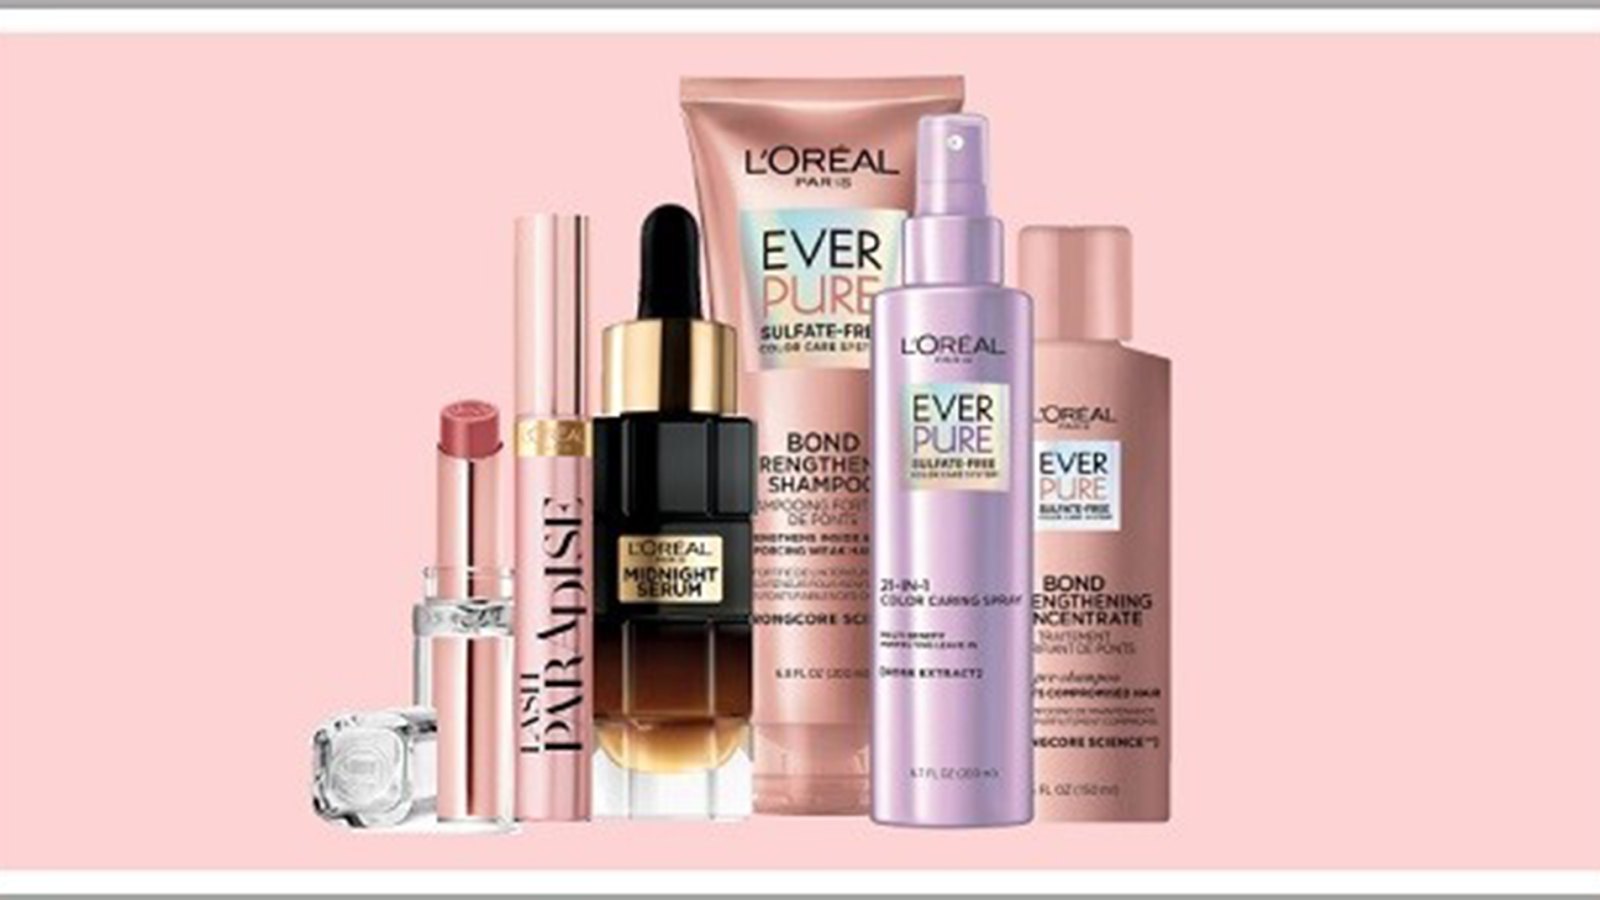 L'Oreal Paris: Over 400 Products Eligible for $10 Off $30